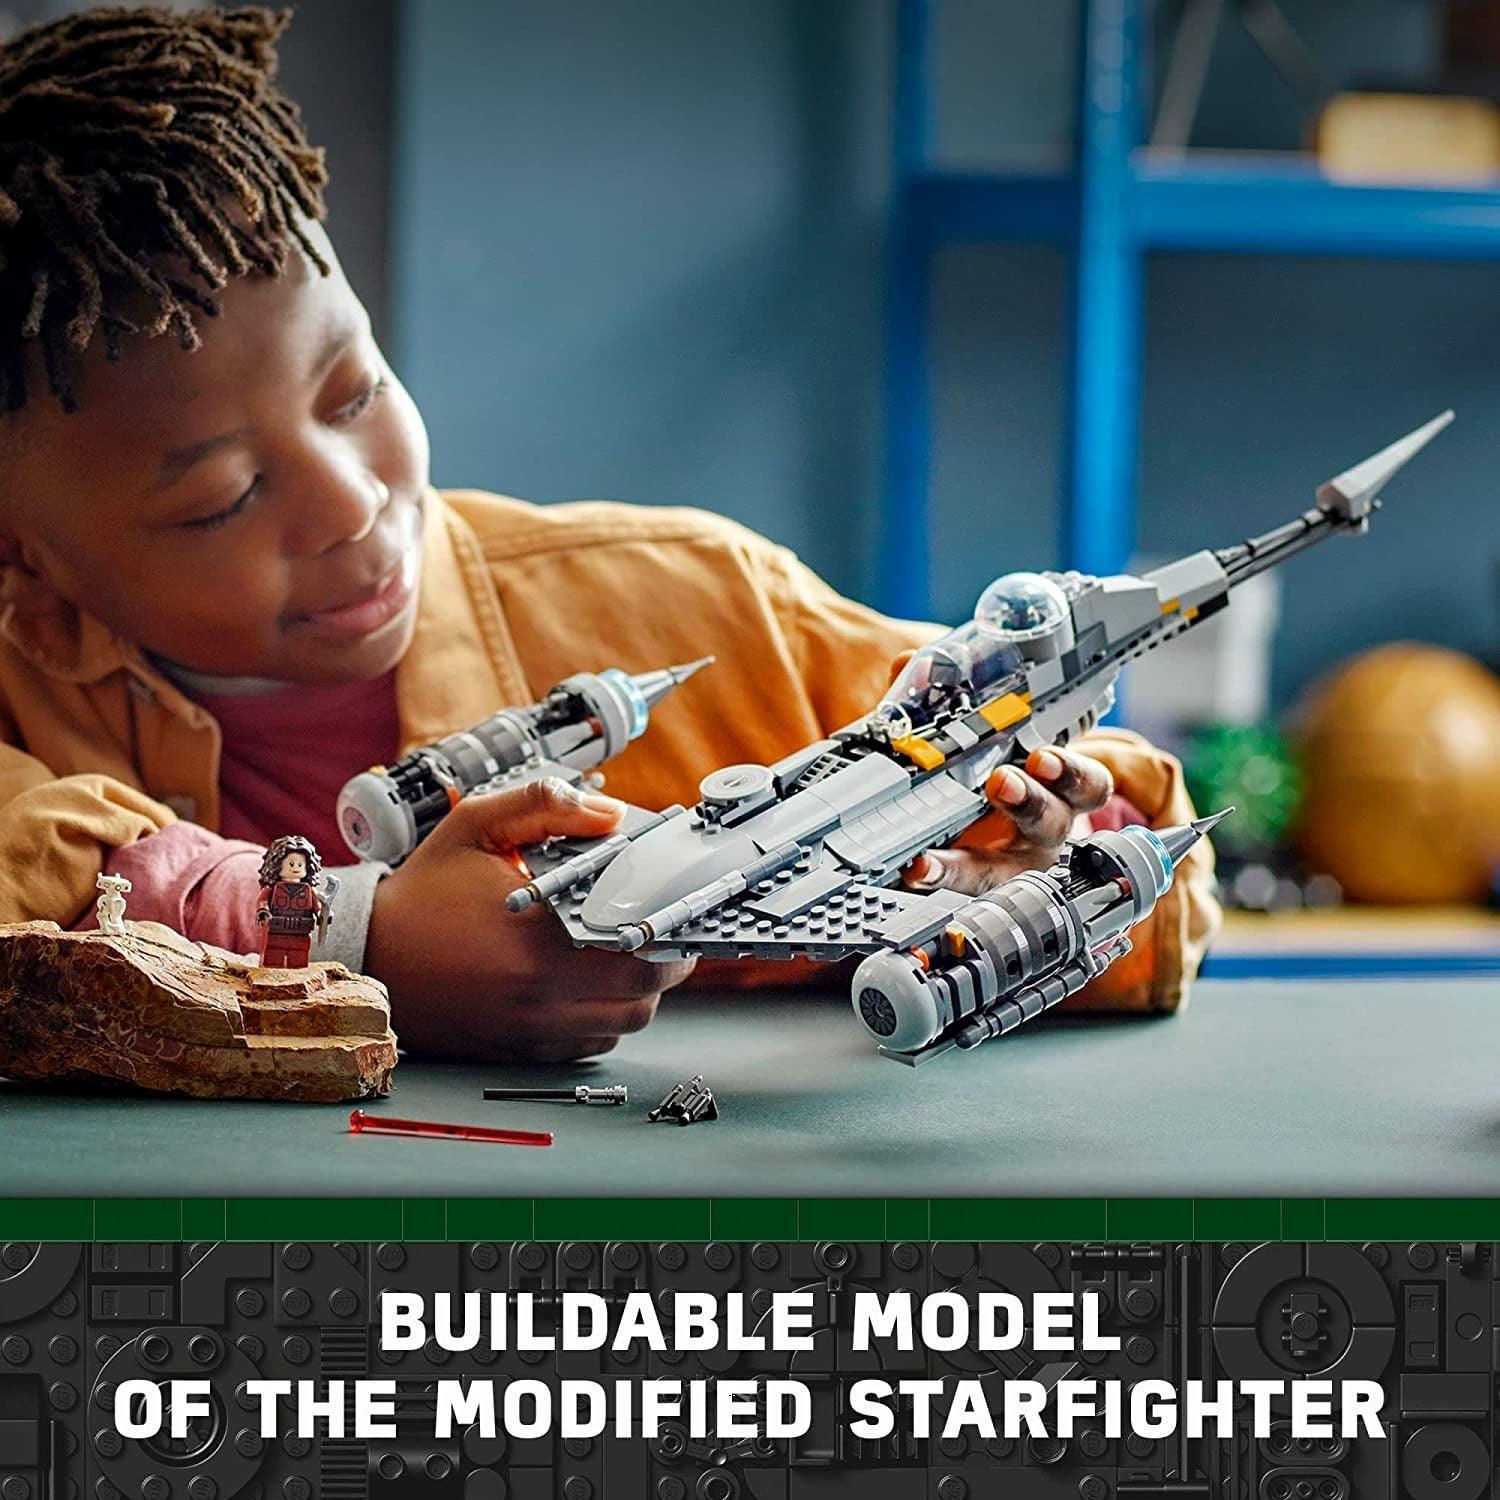 LEGO 75325 Star Wars The Mandalorian's N-1 Starfighter Building Kit, (412 Pieces) - BumbleToys - 5-7 Years, 8+ Years, Boys, LEGO, OXE, Pre-Order, star wars